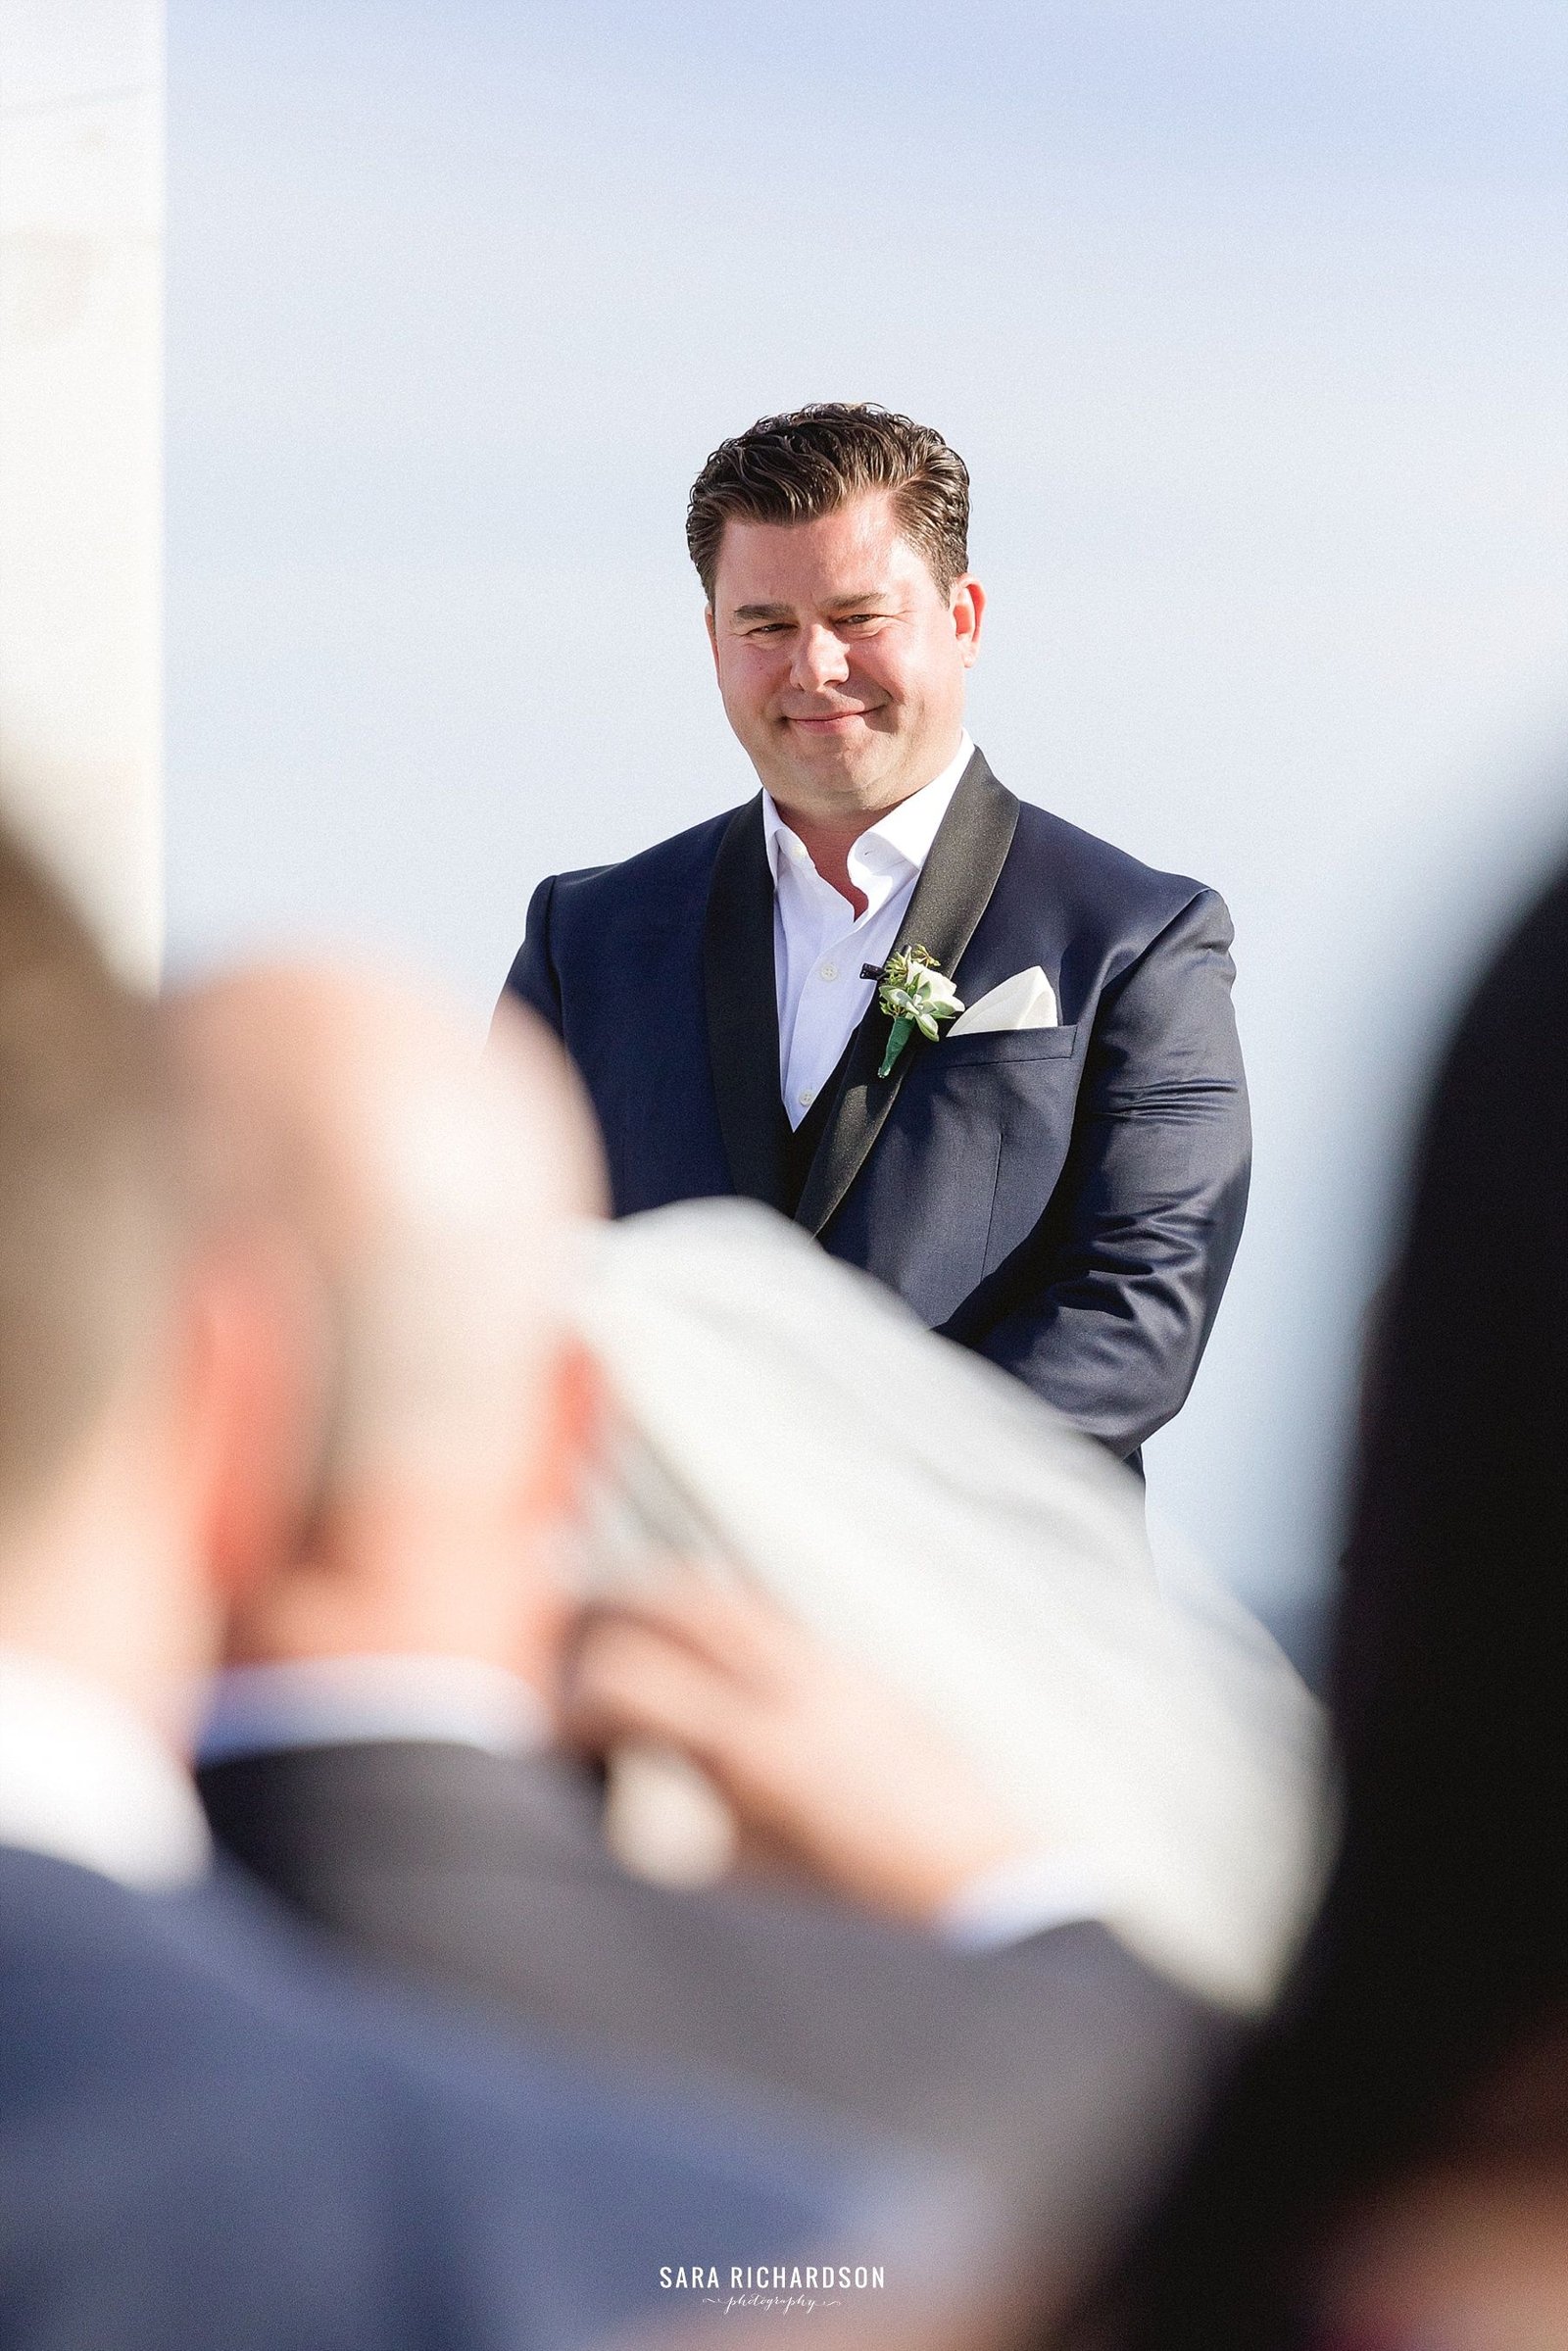 Groom waiting for the Bride as she walks down the aisle for the Ceremony. This wedding was taken place at LeBlanc in Los Cabos Mexico. Photography by Sara Richardson, wedding design by Jesse Wolff